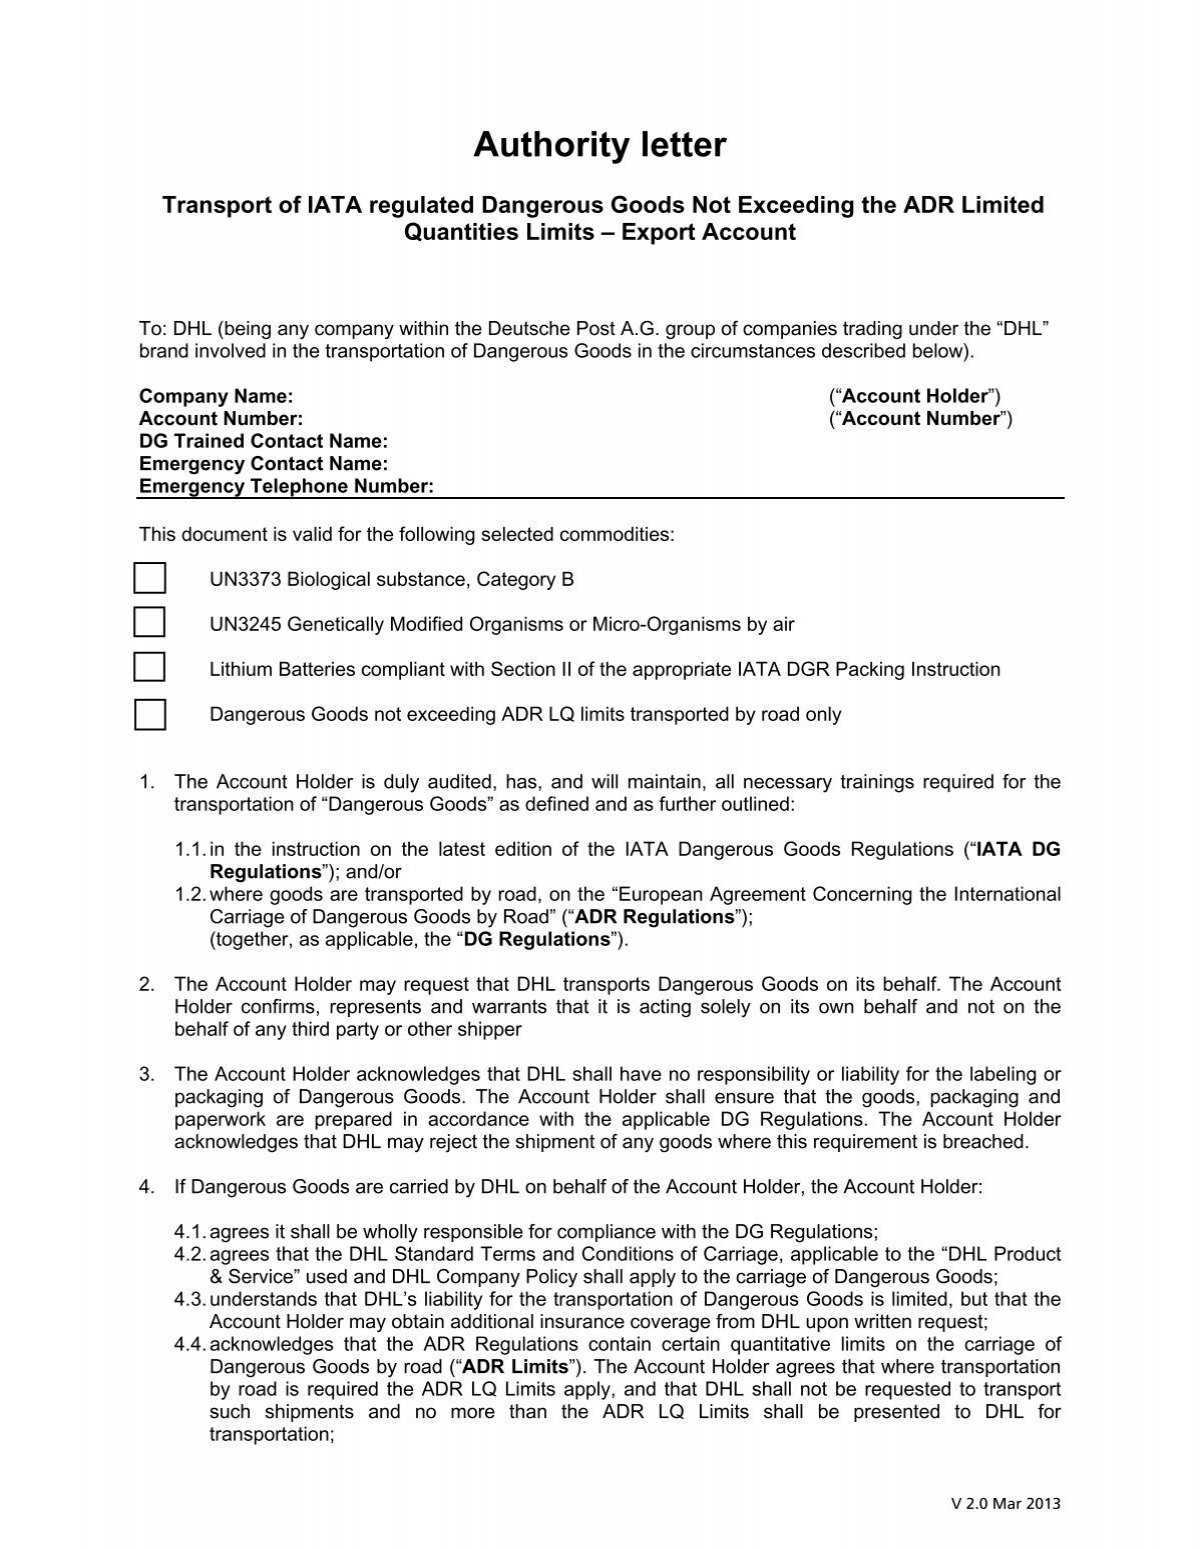 Approval Authority Letter for UN3373 EXPORT - DHL